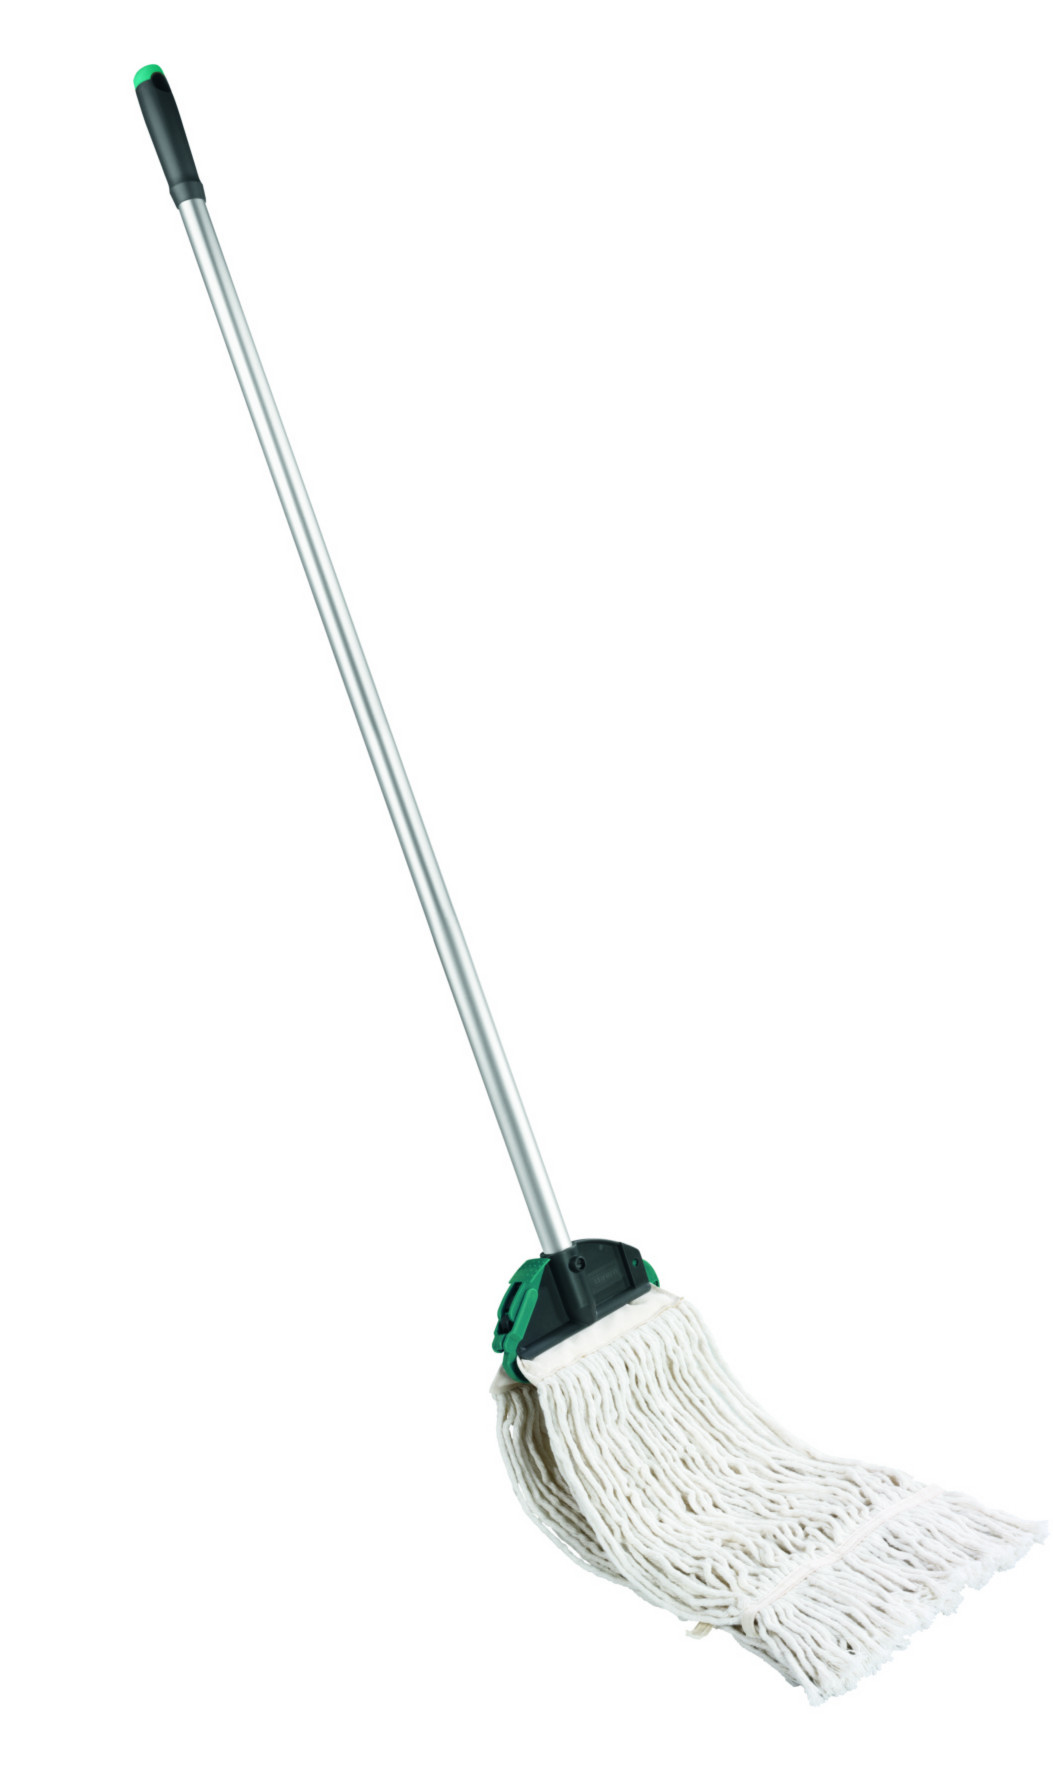 https://www.perumana.com/image/data/products/professional%20cleaning/59120_Pro%20Mop%20Manschette_1_1.jpg